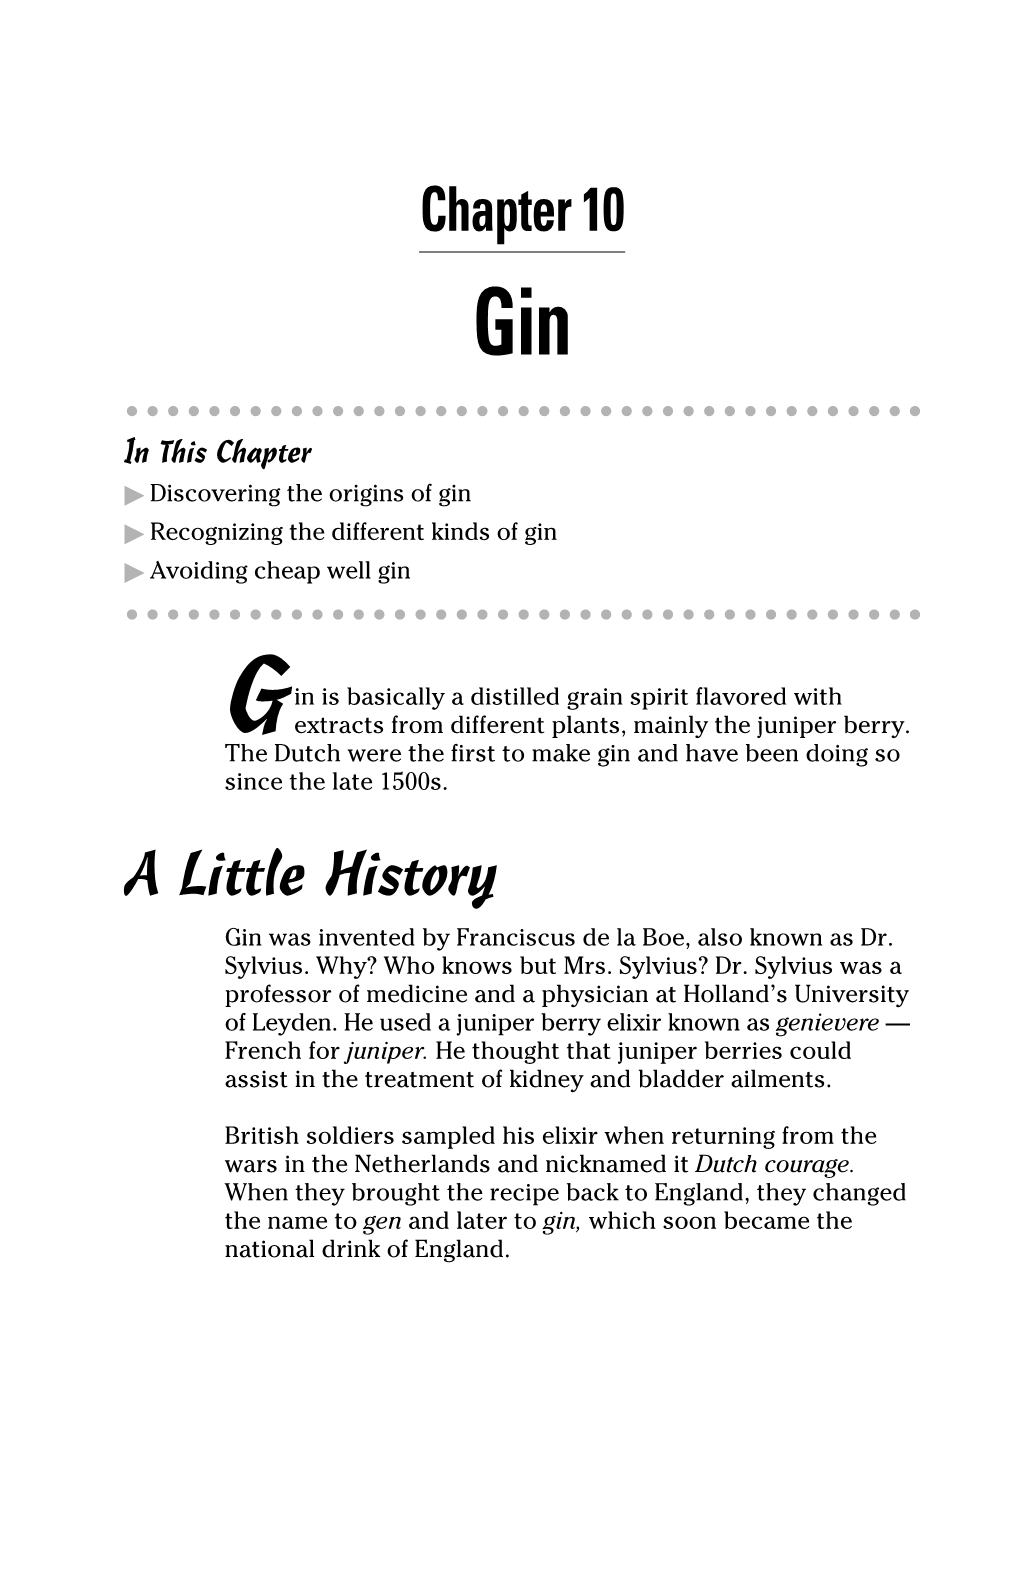 Chapter 10 Gin